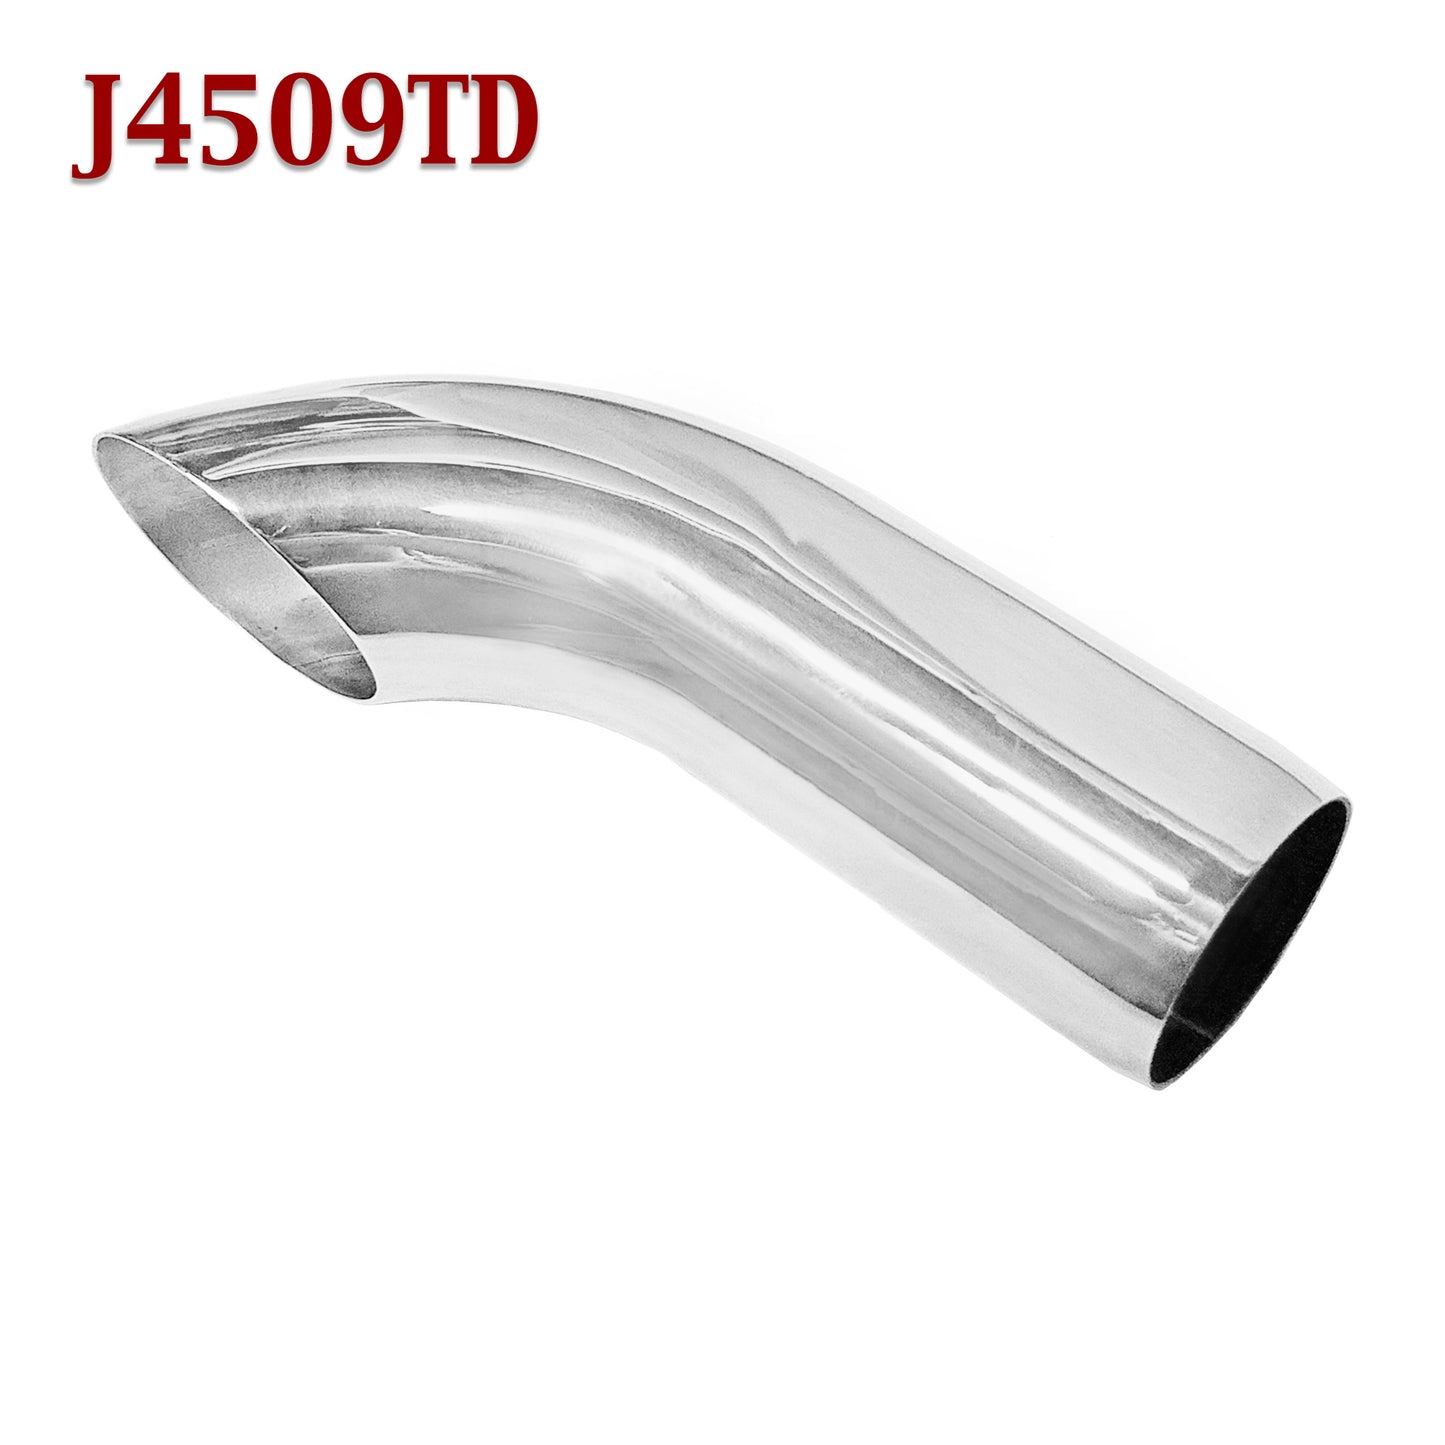 J4509TD 2.25" Stainless Turn Down Exhaust Tip 2 1/4" Inlet 2 1/2" Outlet 9" Long